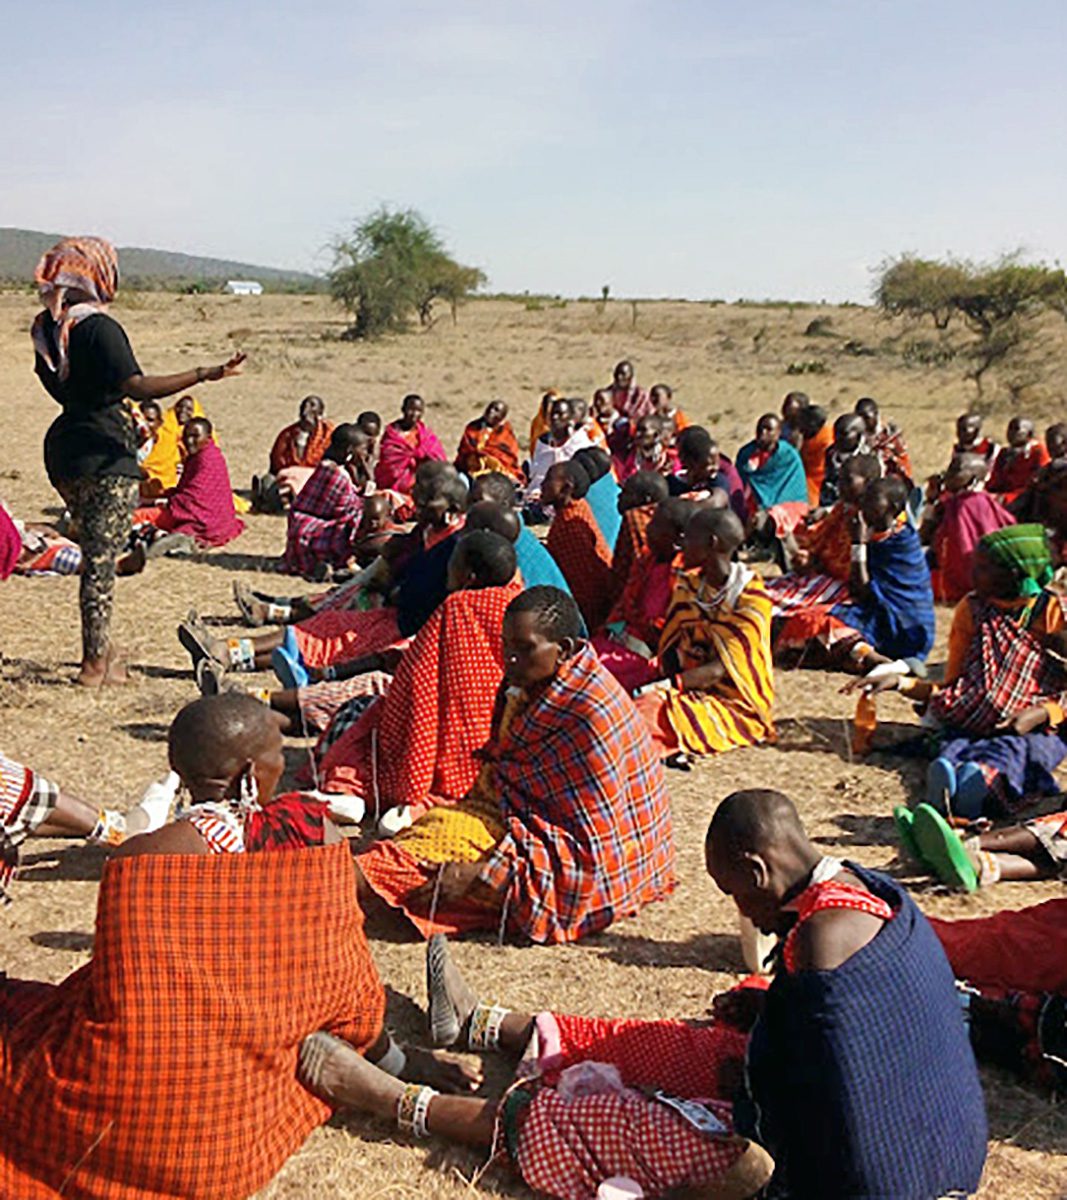 asela teaching maasai women about honey collection from beehives